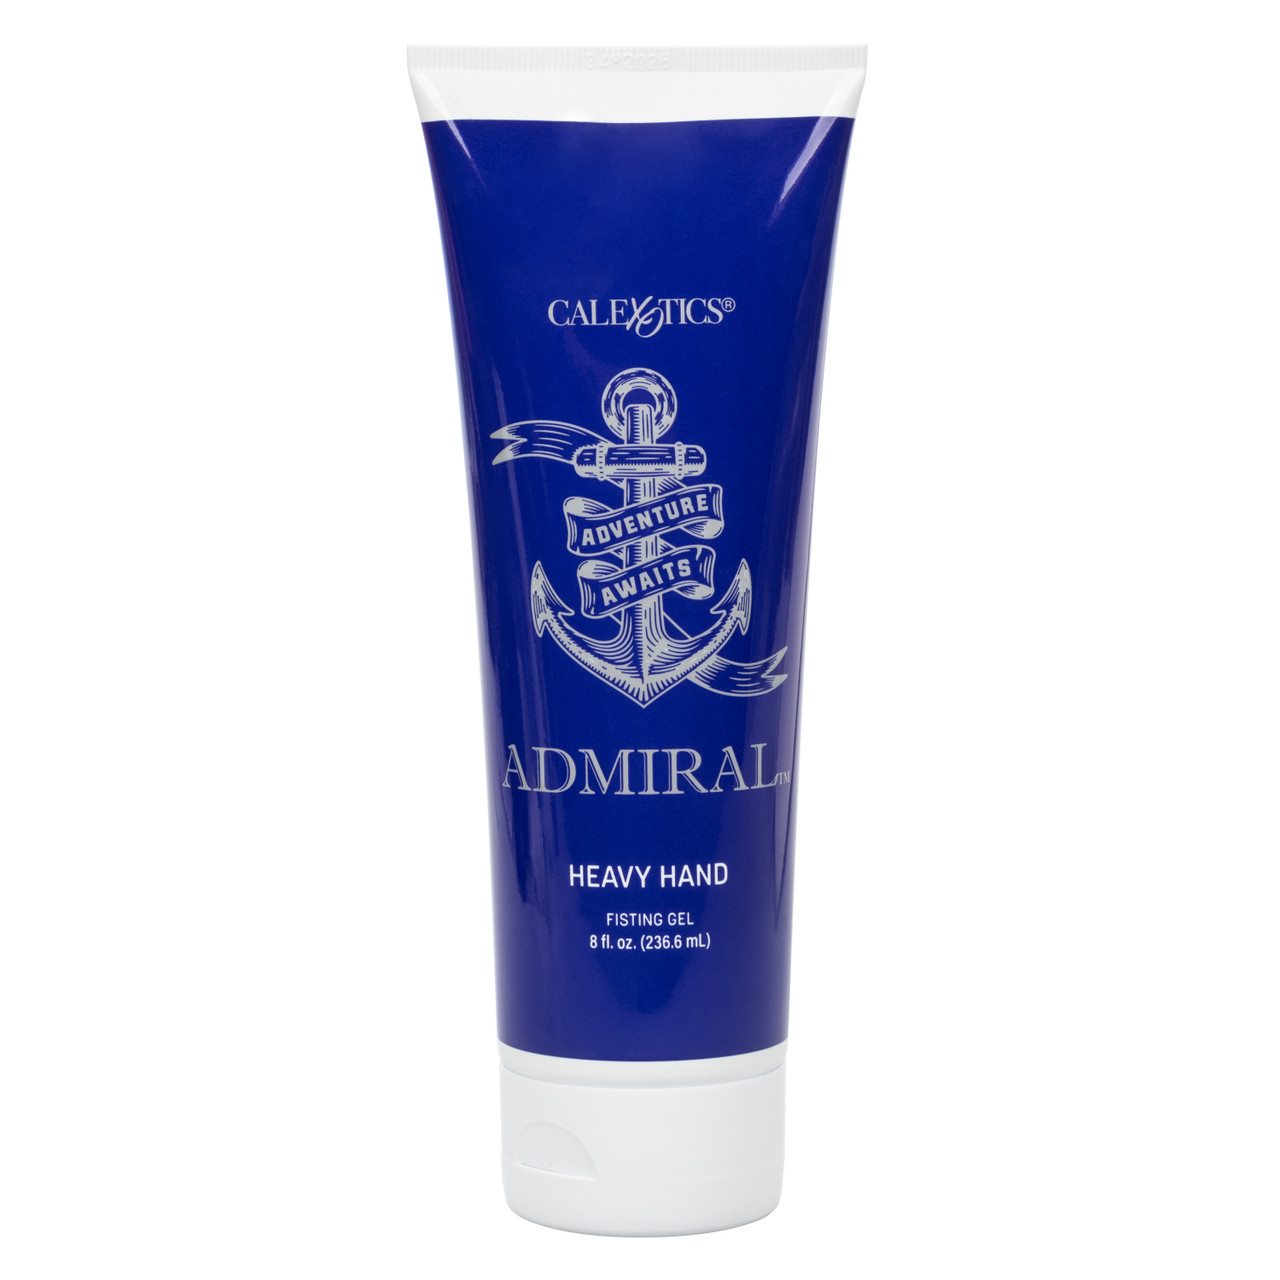 ADMIRAL HEAVY HAND FISTING GEL 8OZ TUBE - Click Image to Close